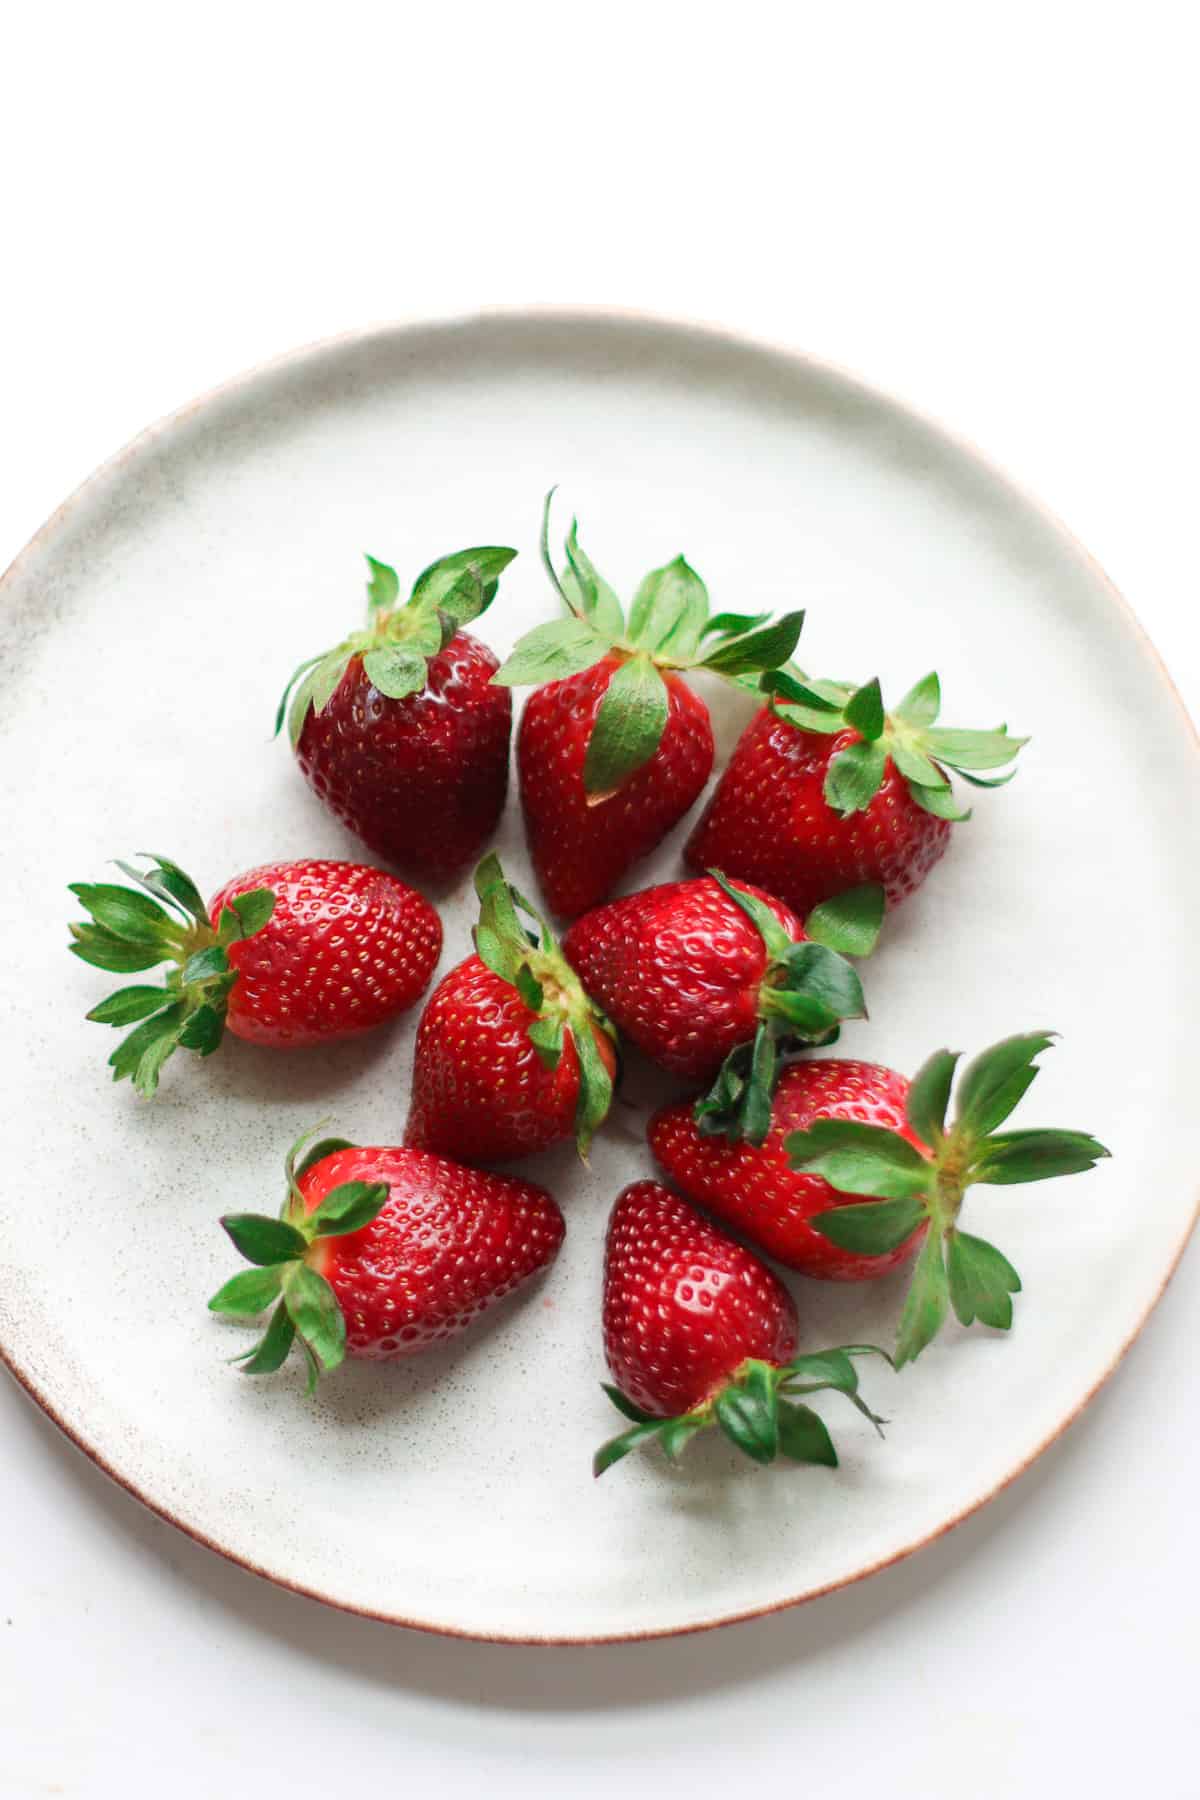 Fresh strawberries with stem on.